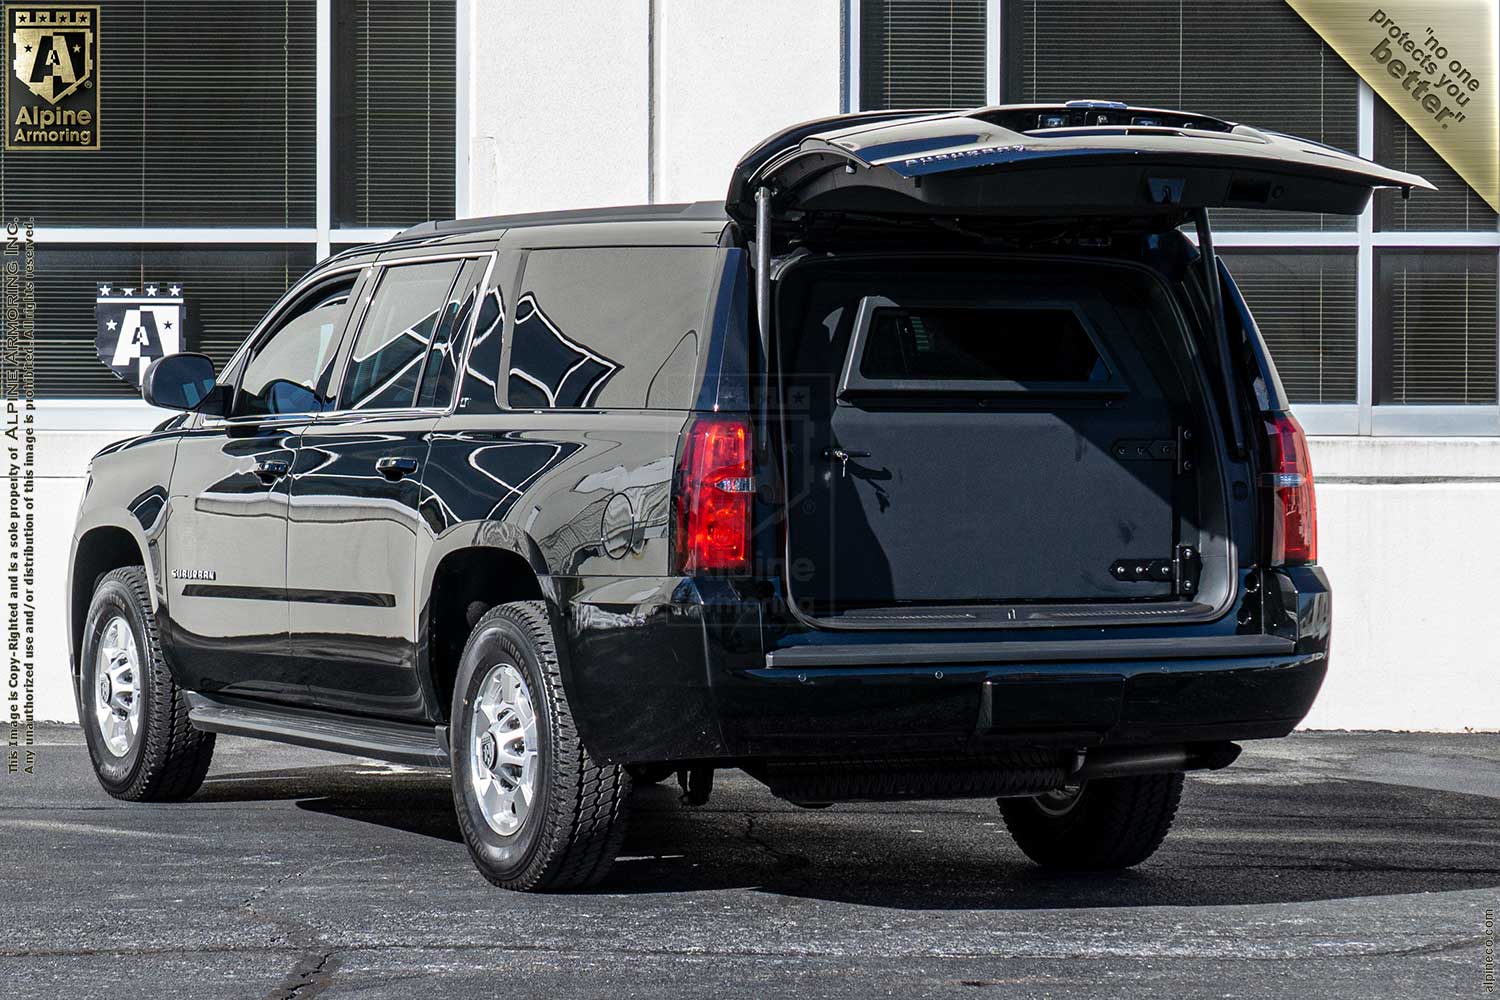 New Inventory armored Chevrolet Suburban 3500HD LT Level A11/B7 Exterior & Interior Images VIN:TBD